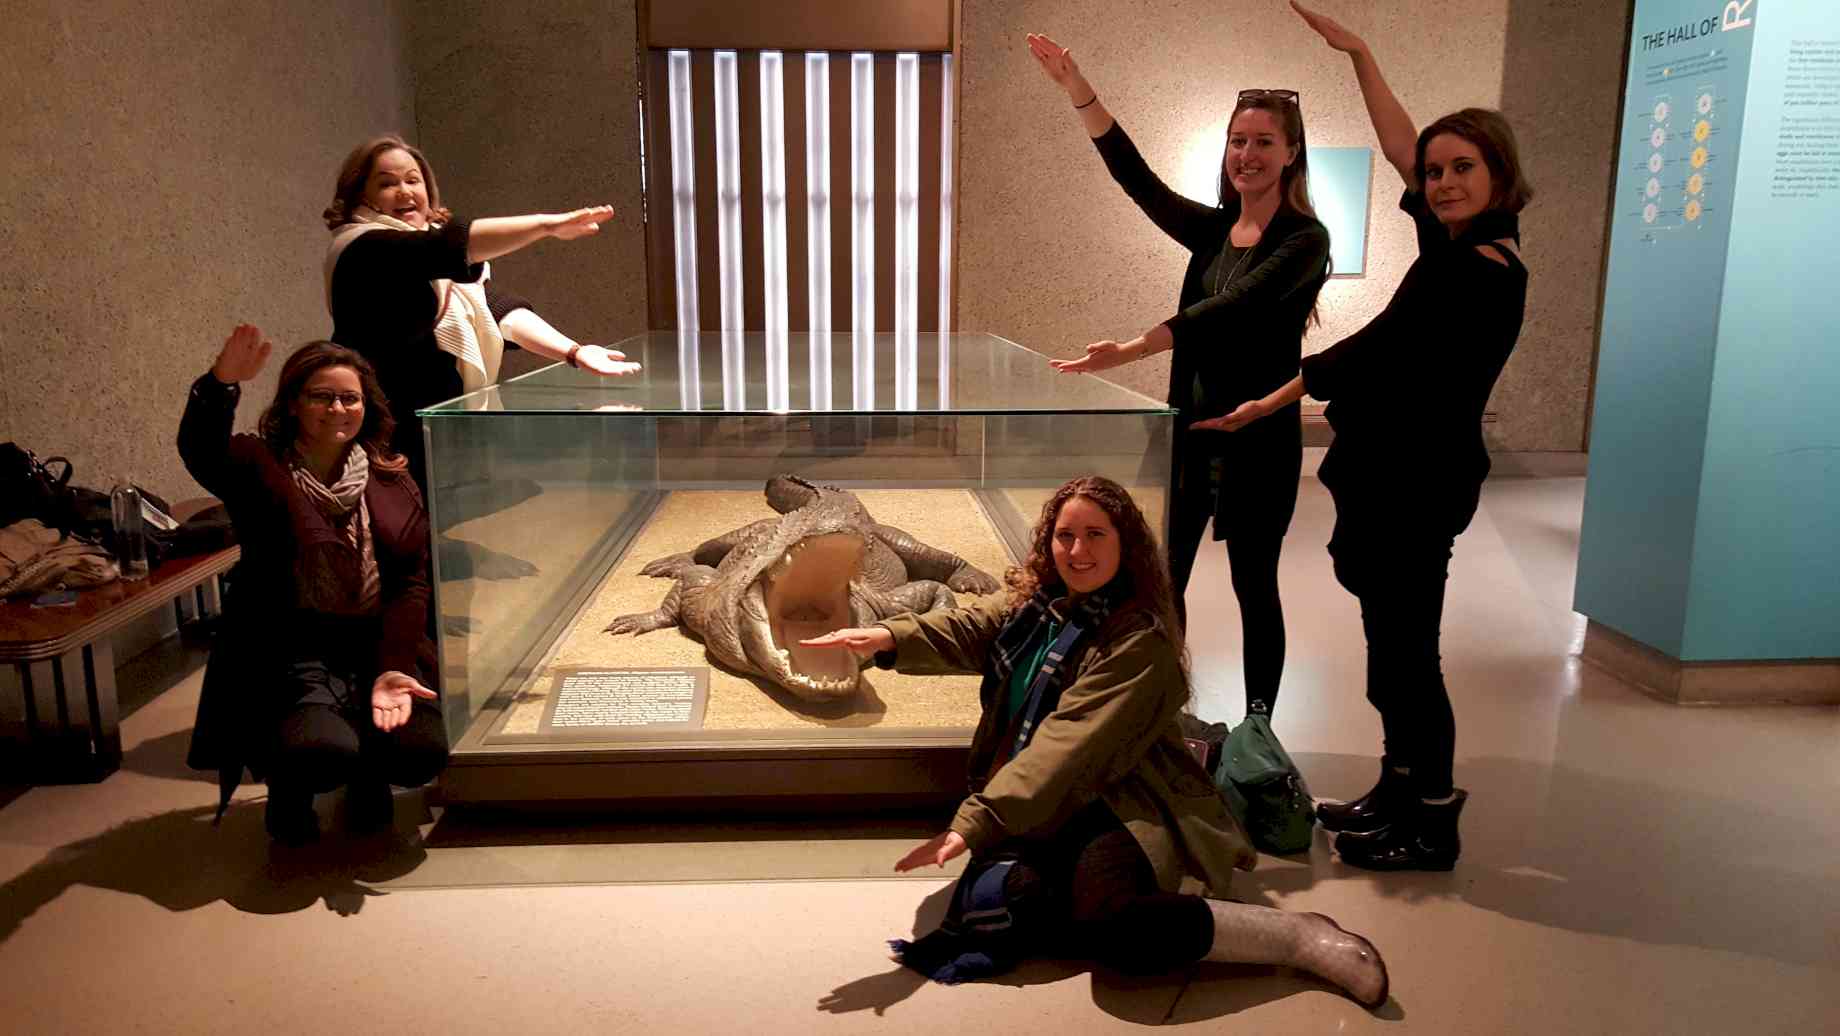 Museum Studies students ‘gator chomp’ in New York City. [Alt text: Five women pose in front of a taxidermied alligator in a glass case. Their arms are held to mimic alligators with open mouths.]